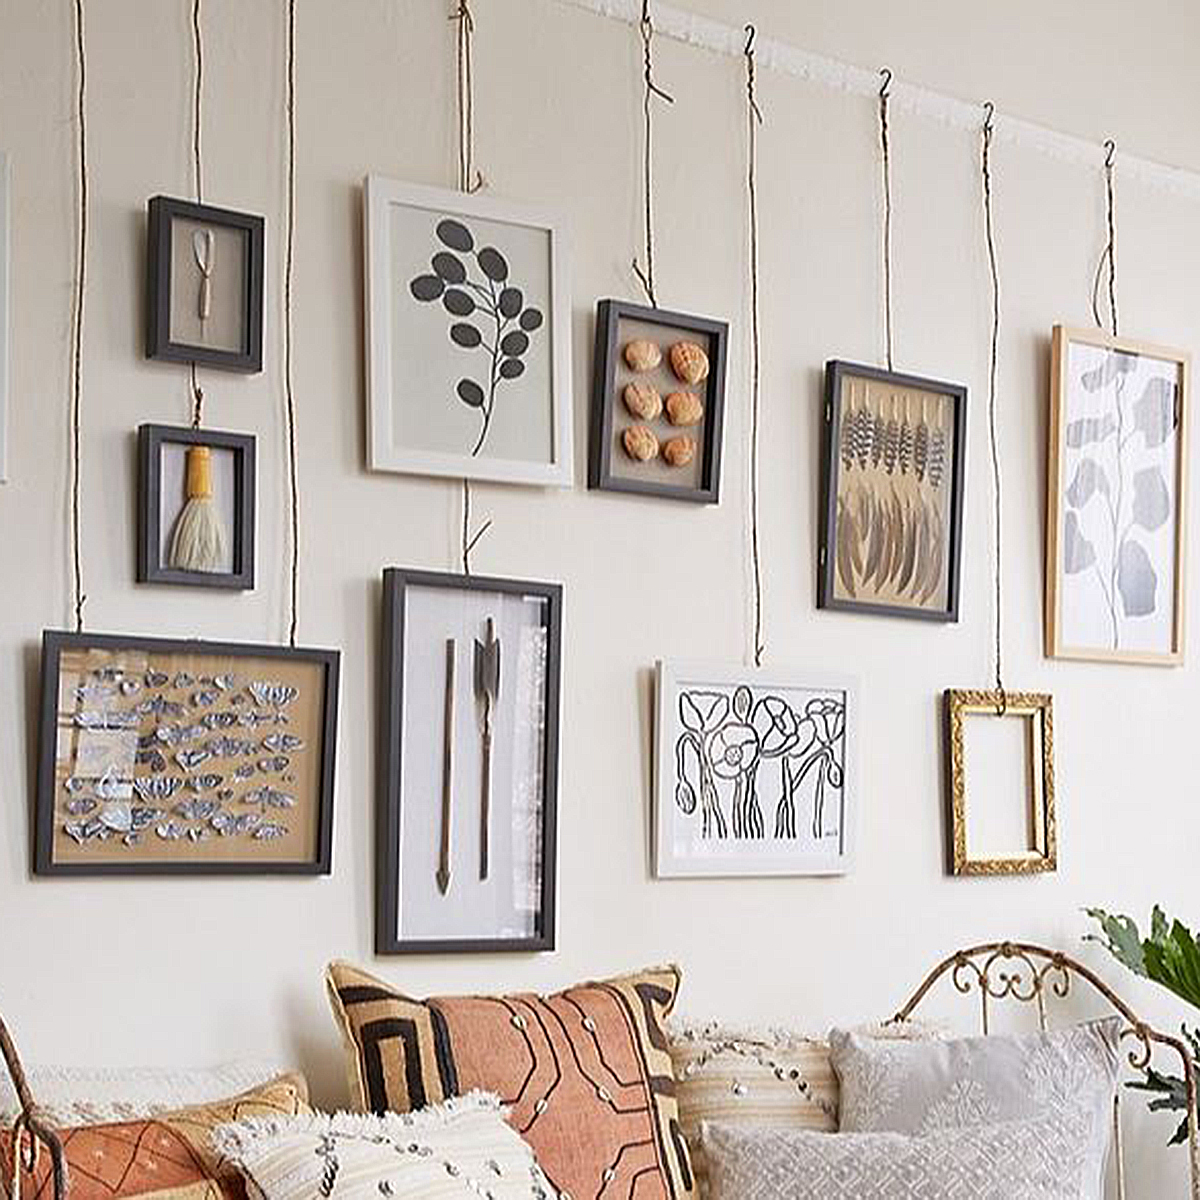 7 Gorgeous Gallery Wall Layouts That Work Every Time